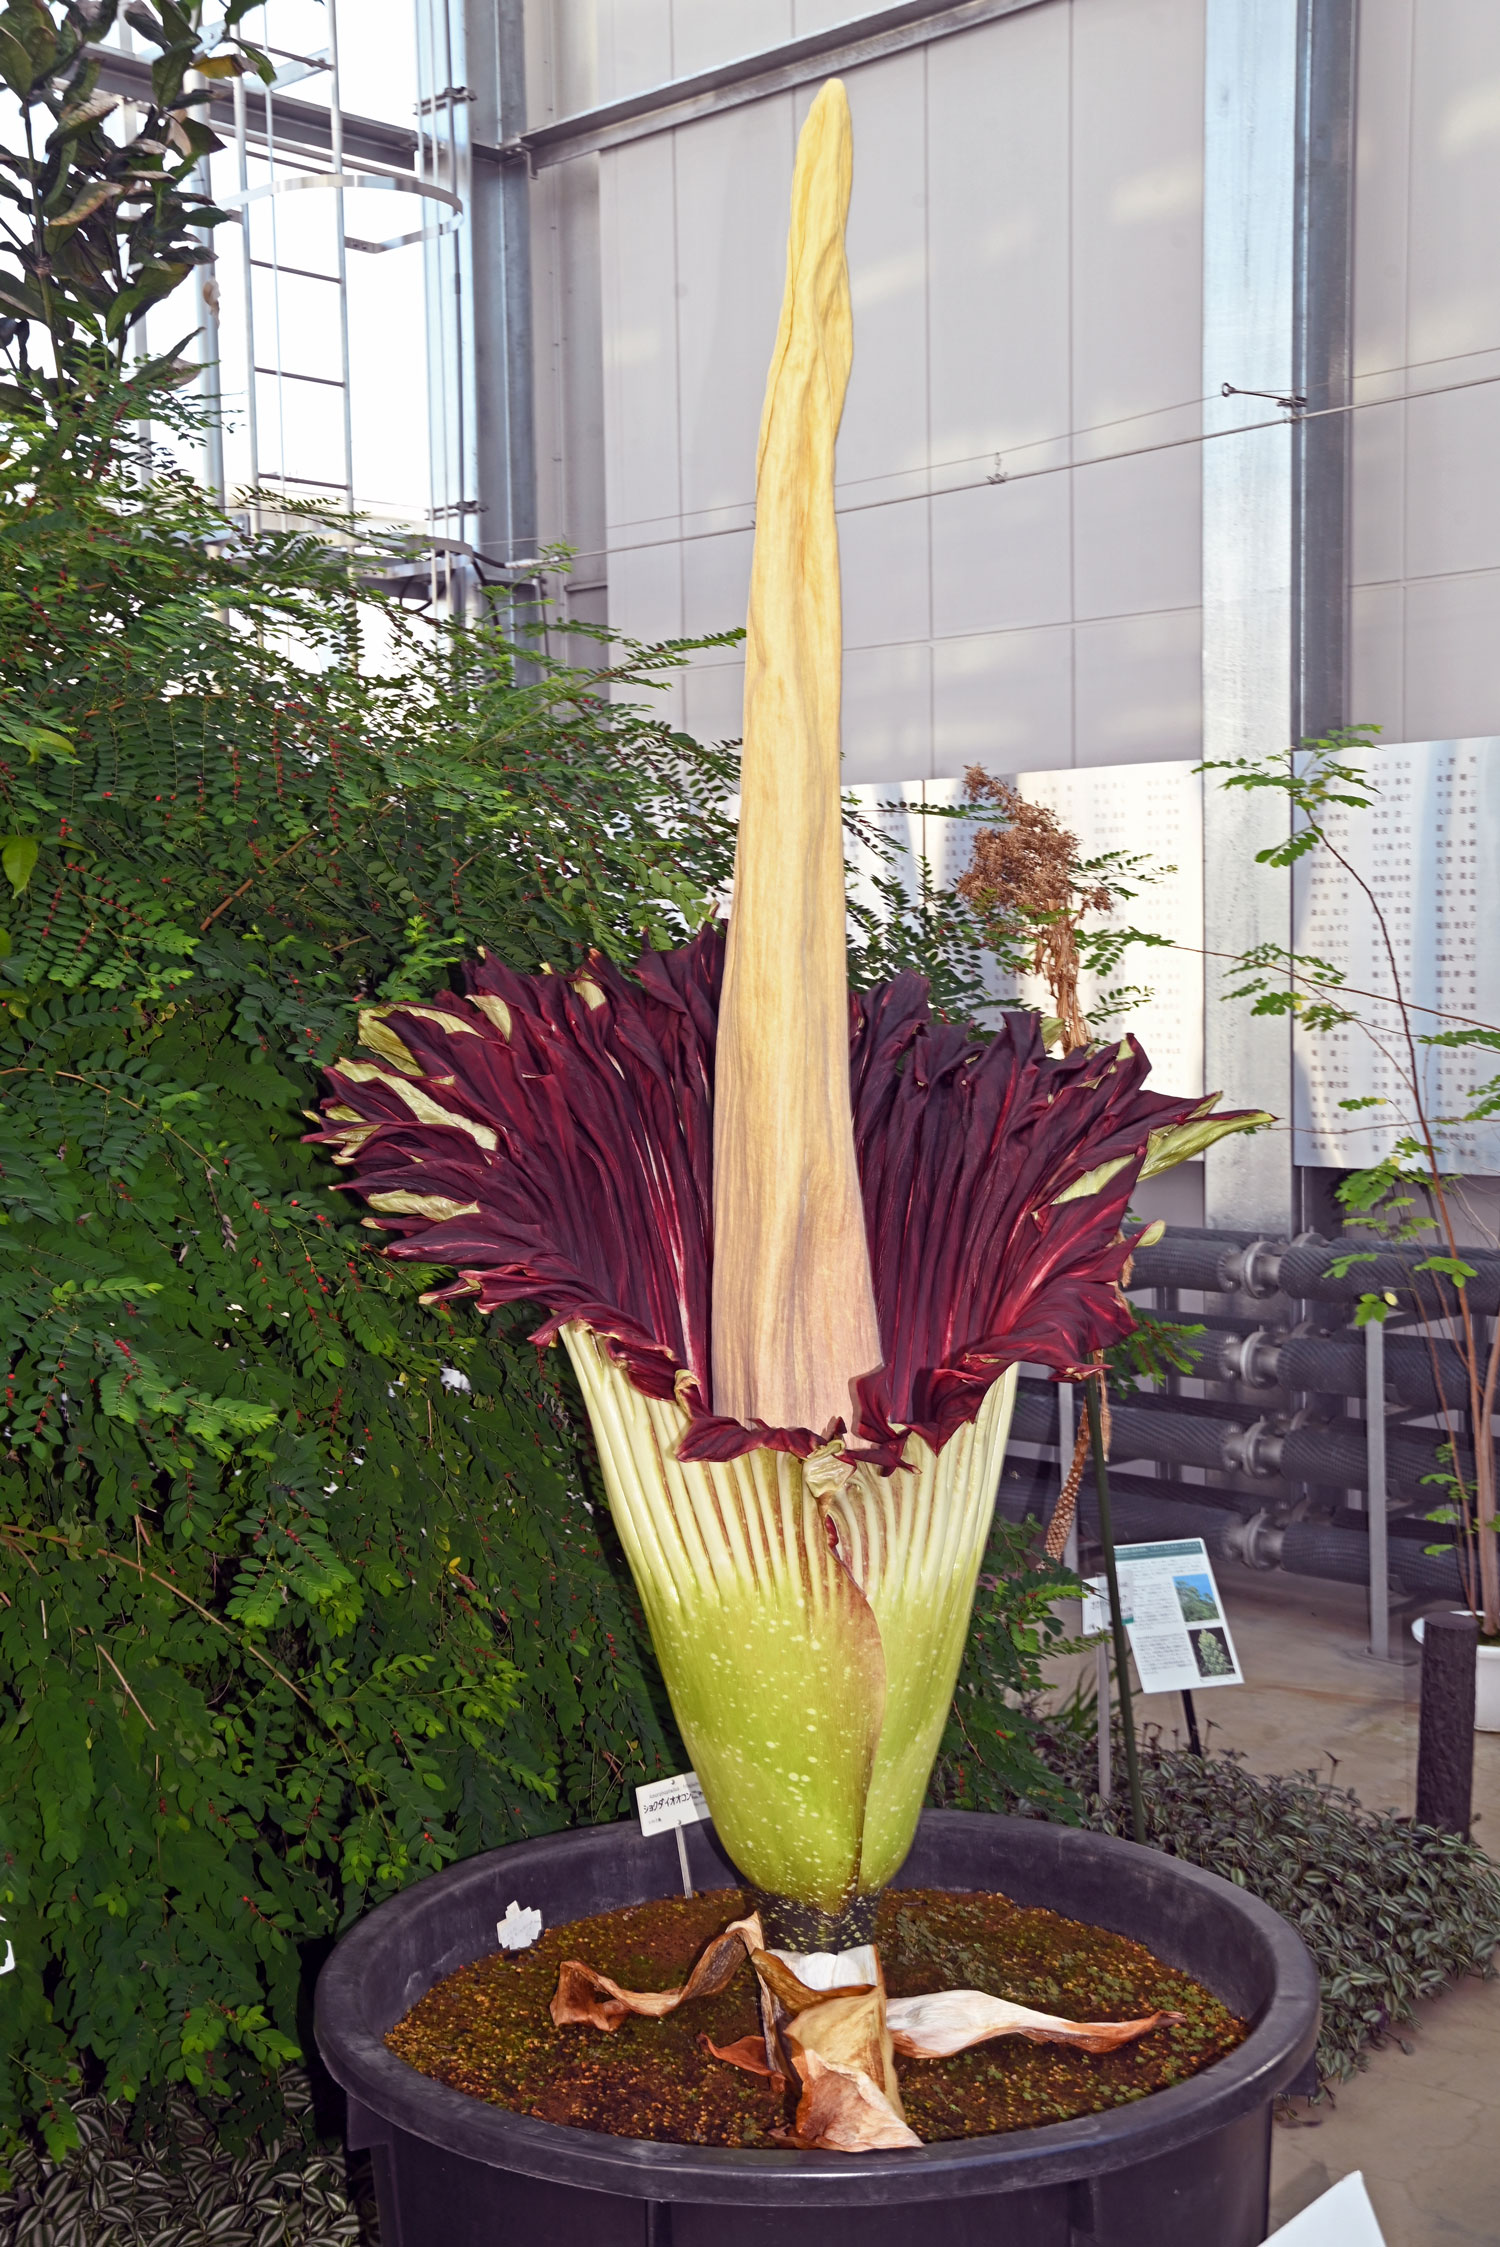 Topics: Shokudai O'konjaku blooms for the first time in 13 years